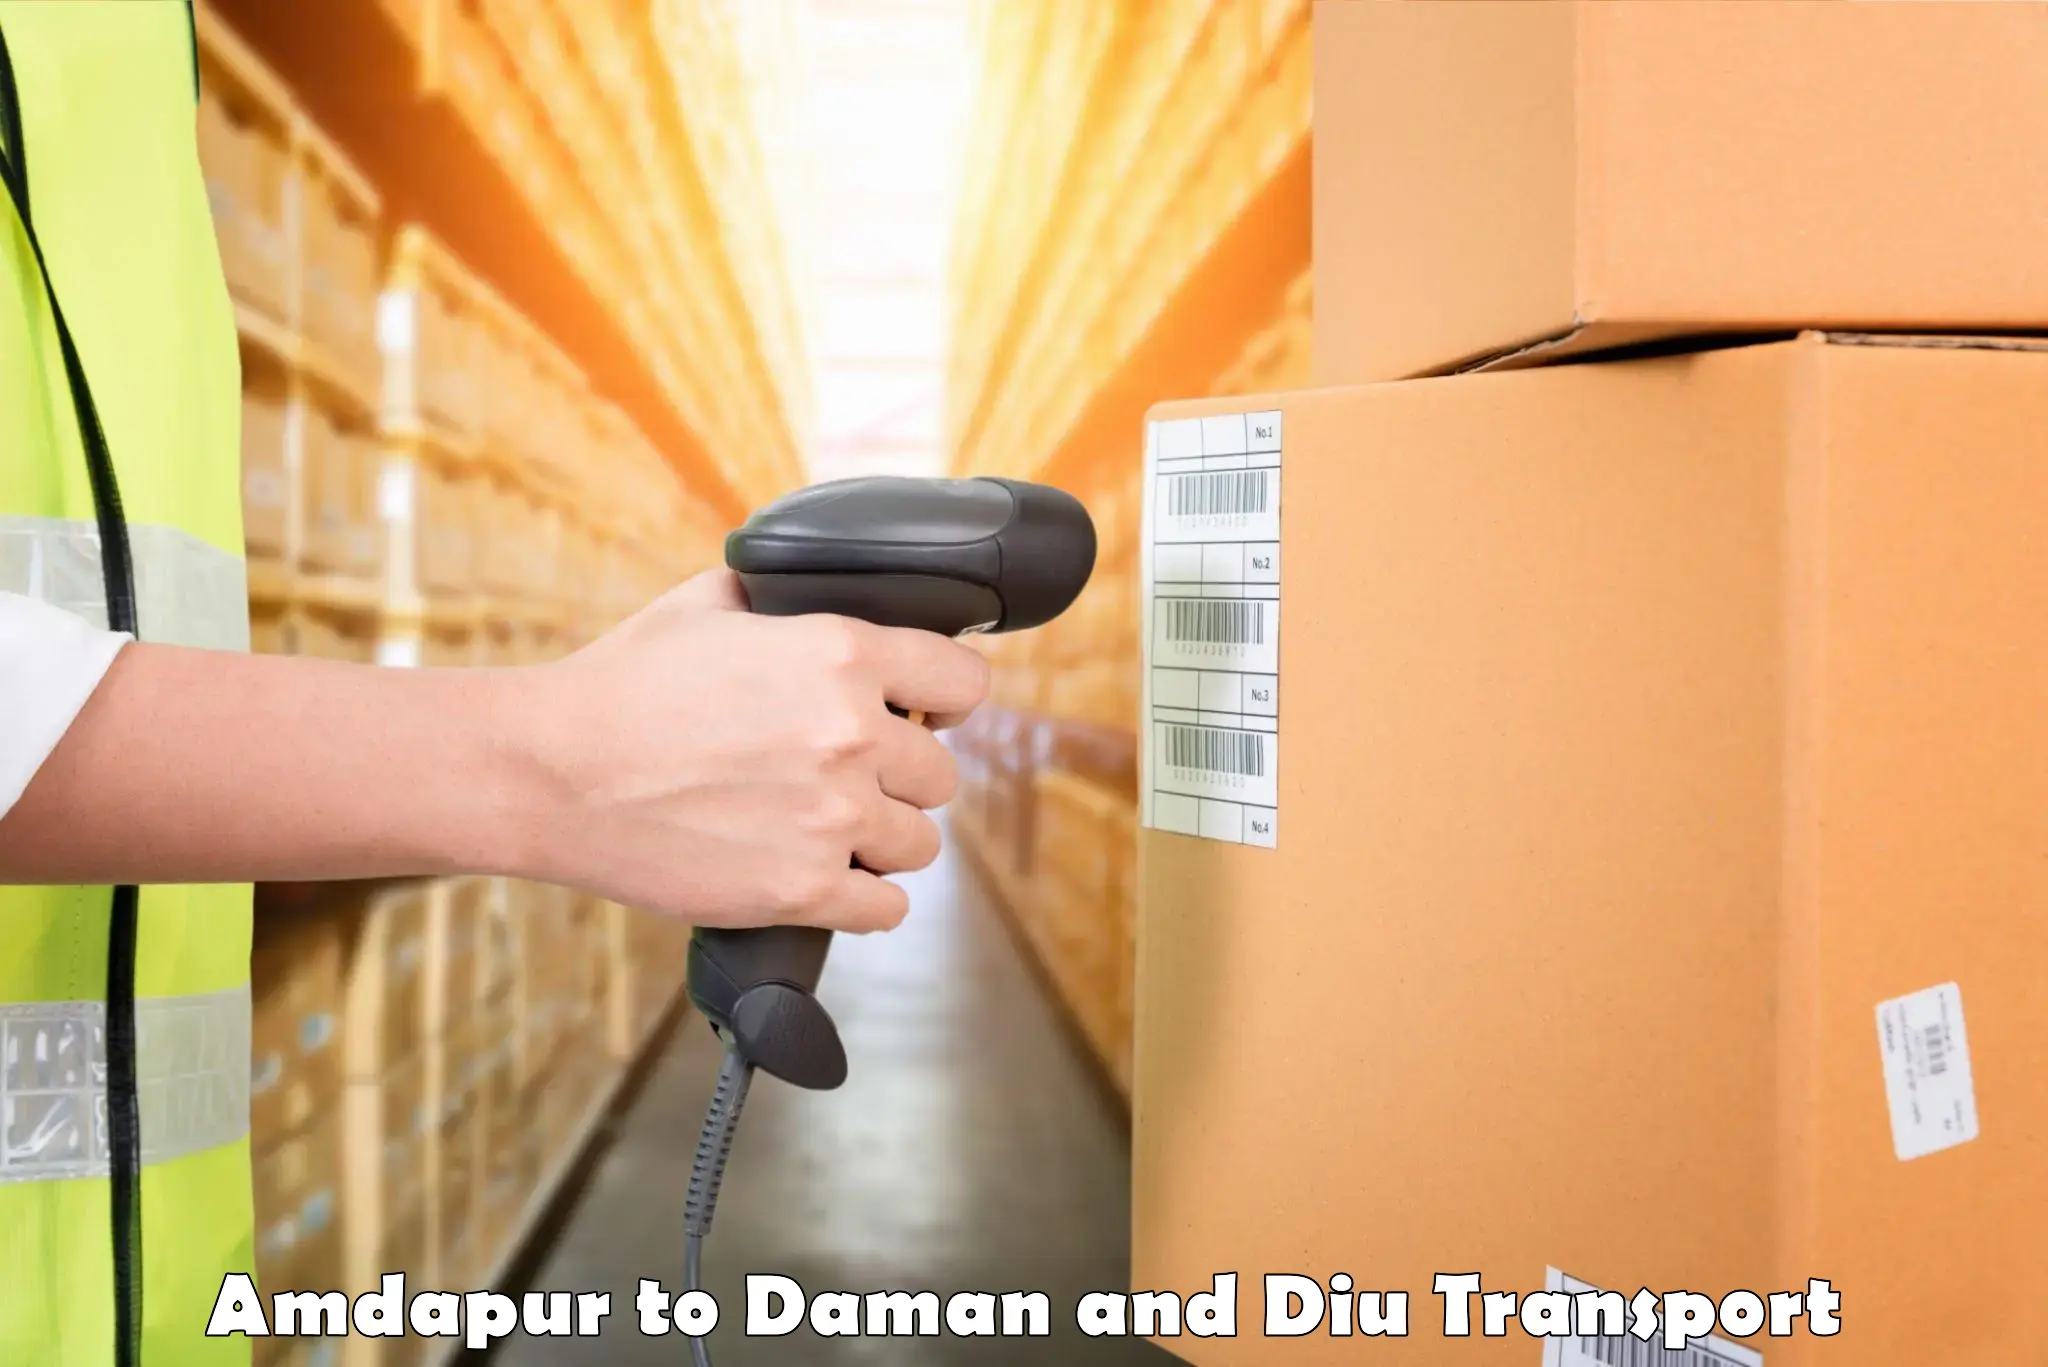 Luggage transport services Amdapur to Diu